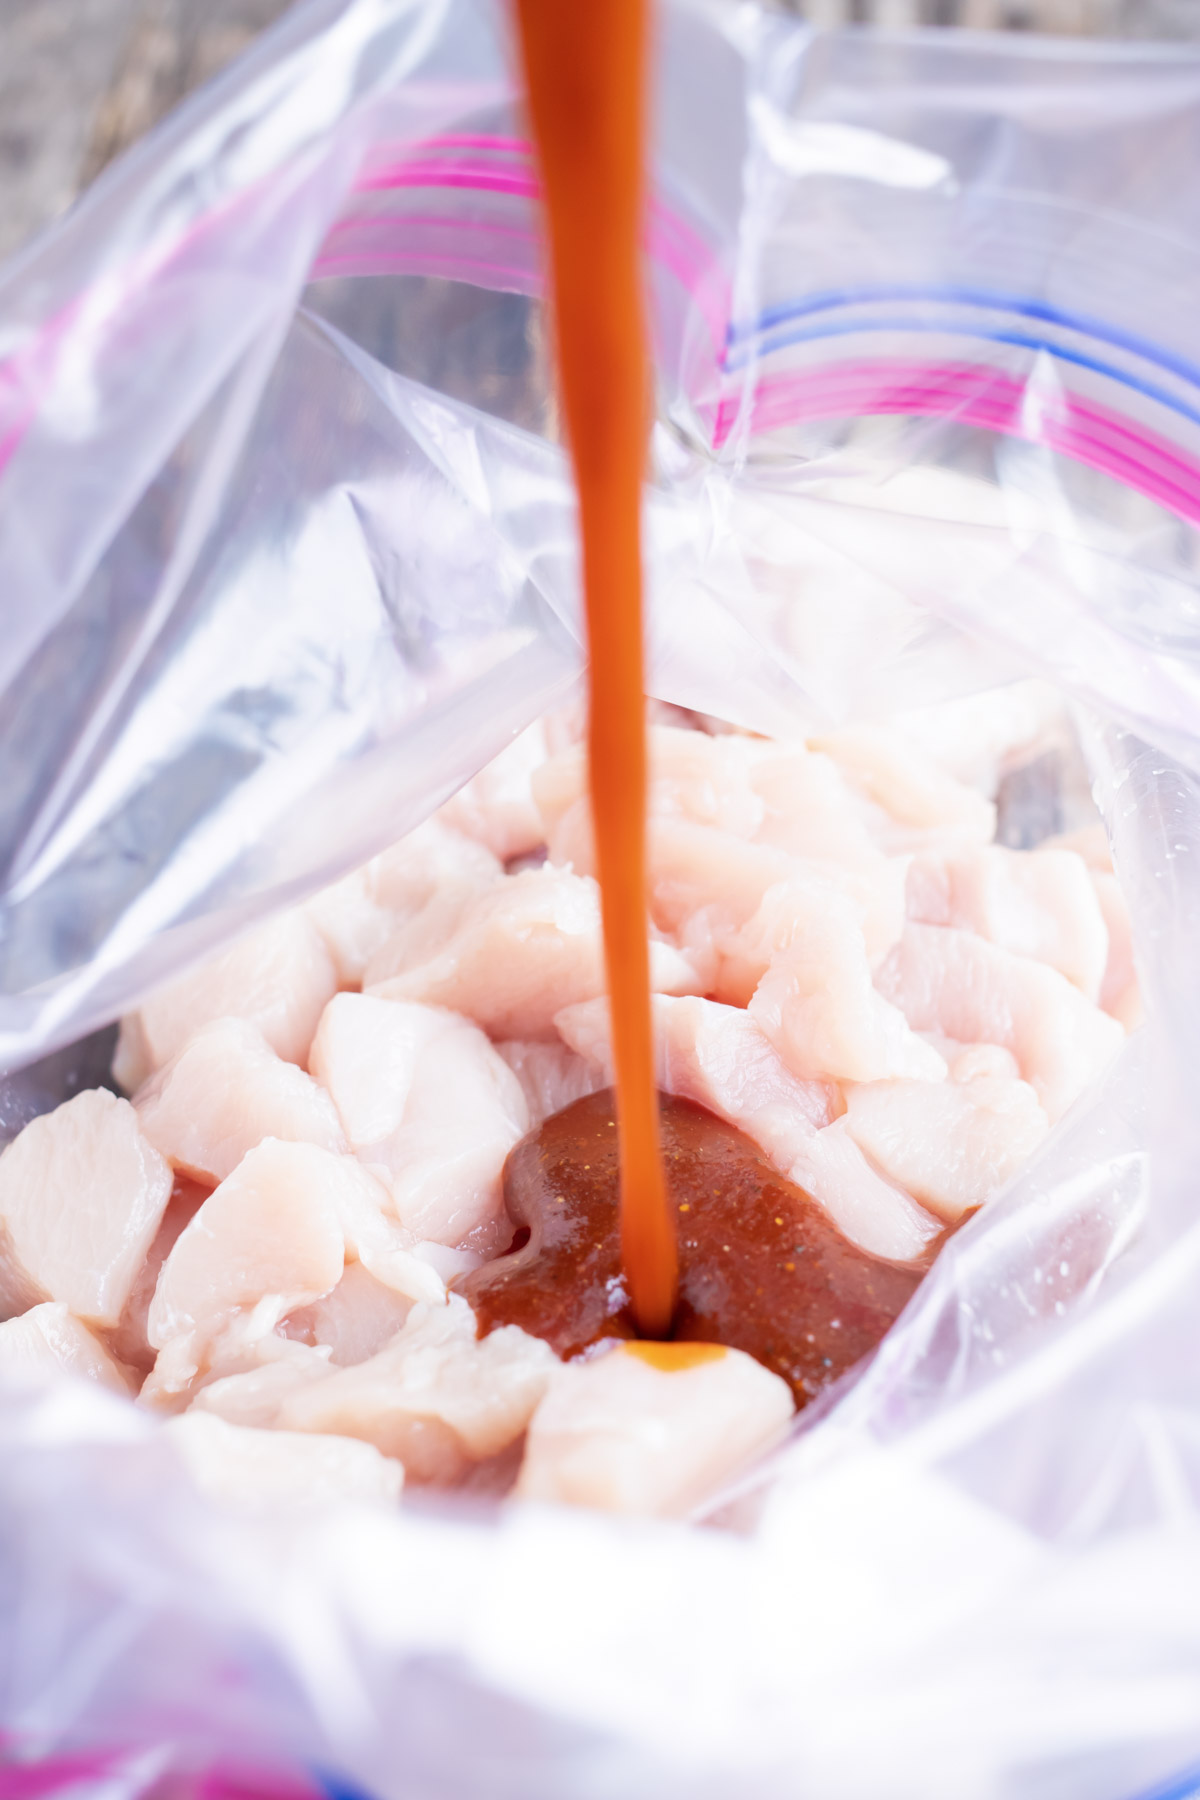 Chicken and marinade are added to a ziploc bag.